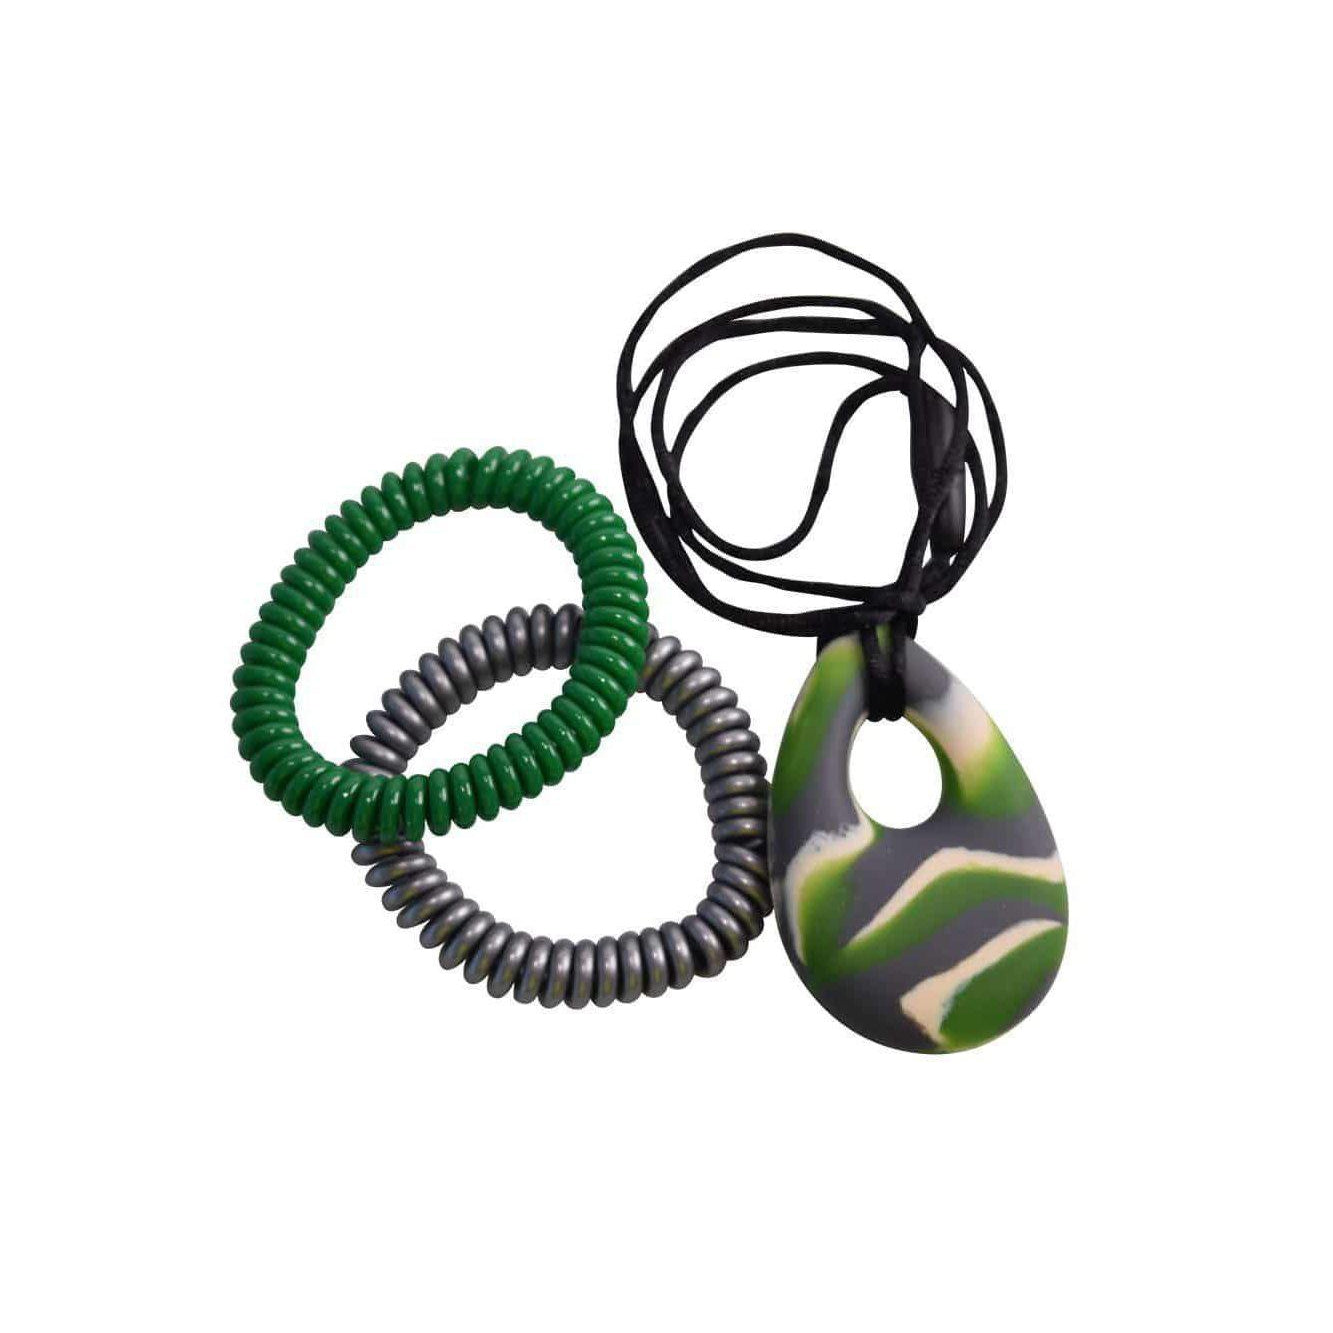 Buds oval Chew Pendant With Breakaway Clasp Necklace- Green N Gray Swirl Color